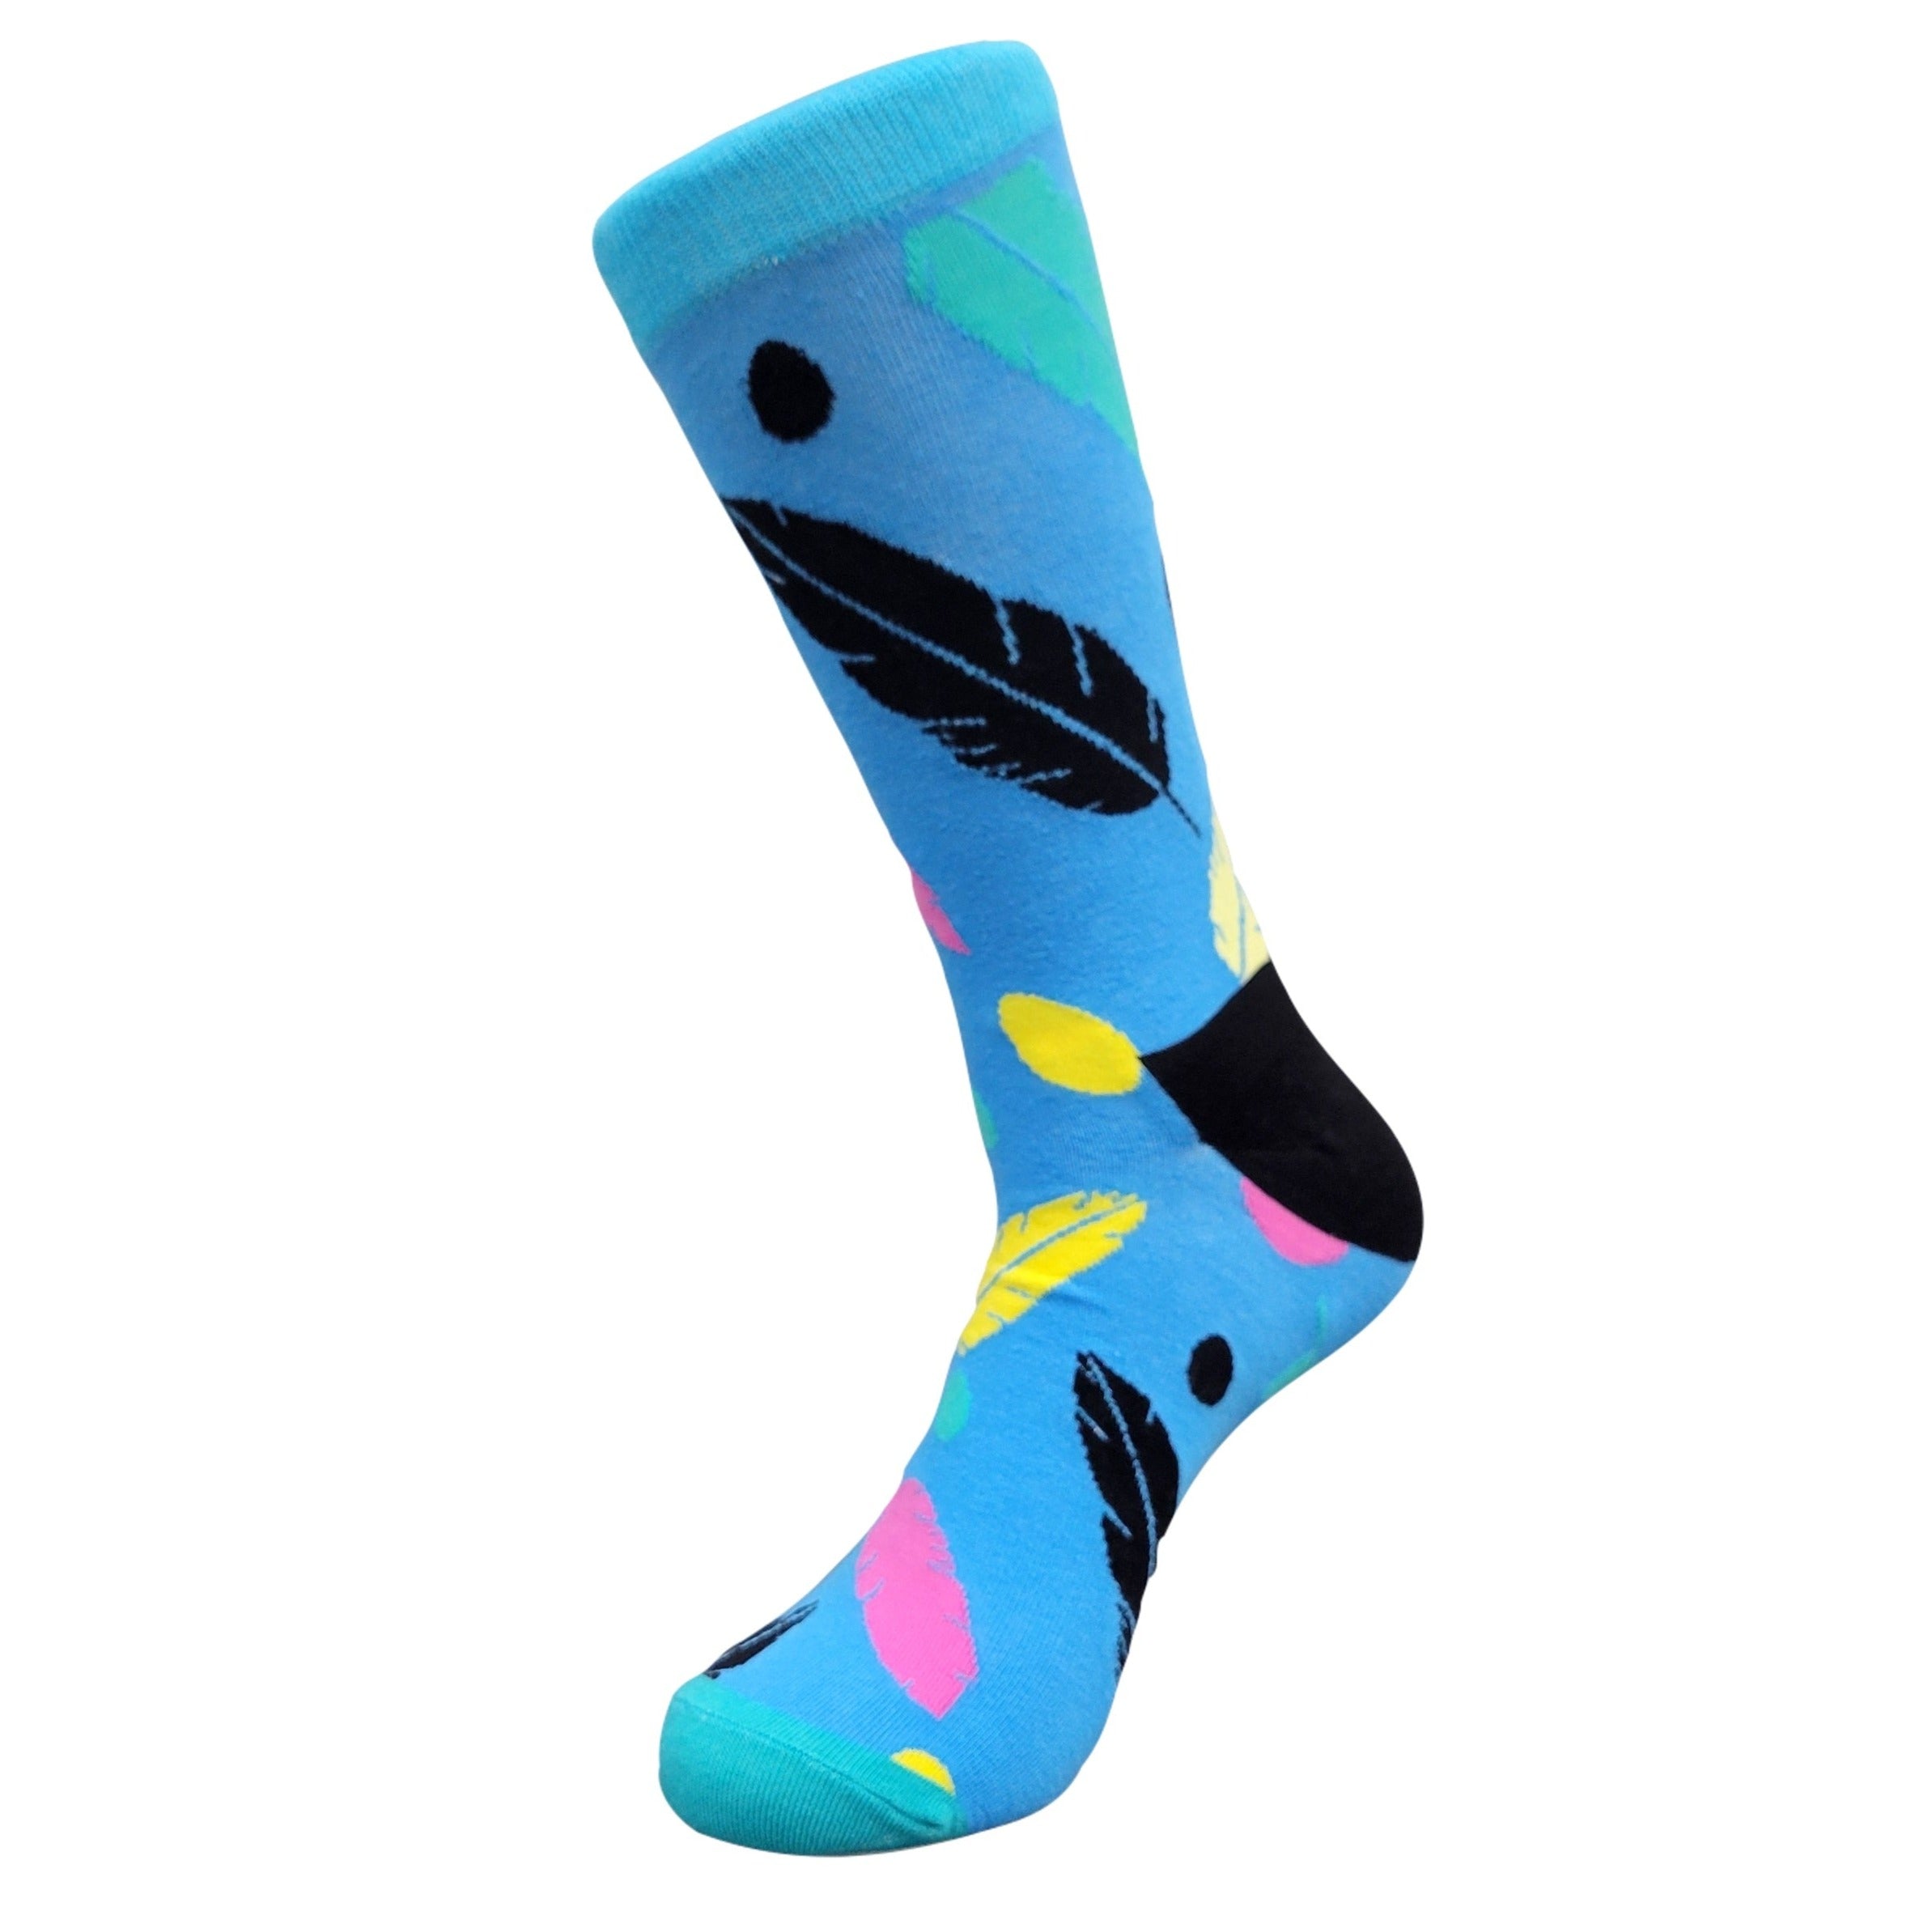 Colorful Feather Pattern Socks from the Sock Panda